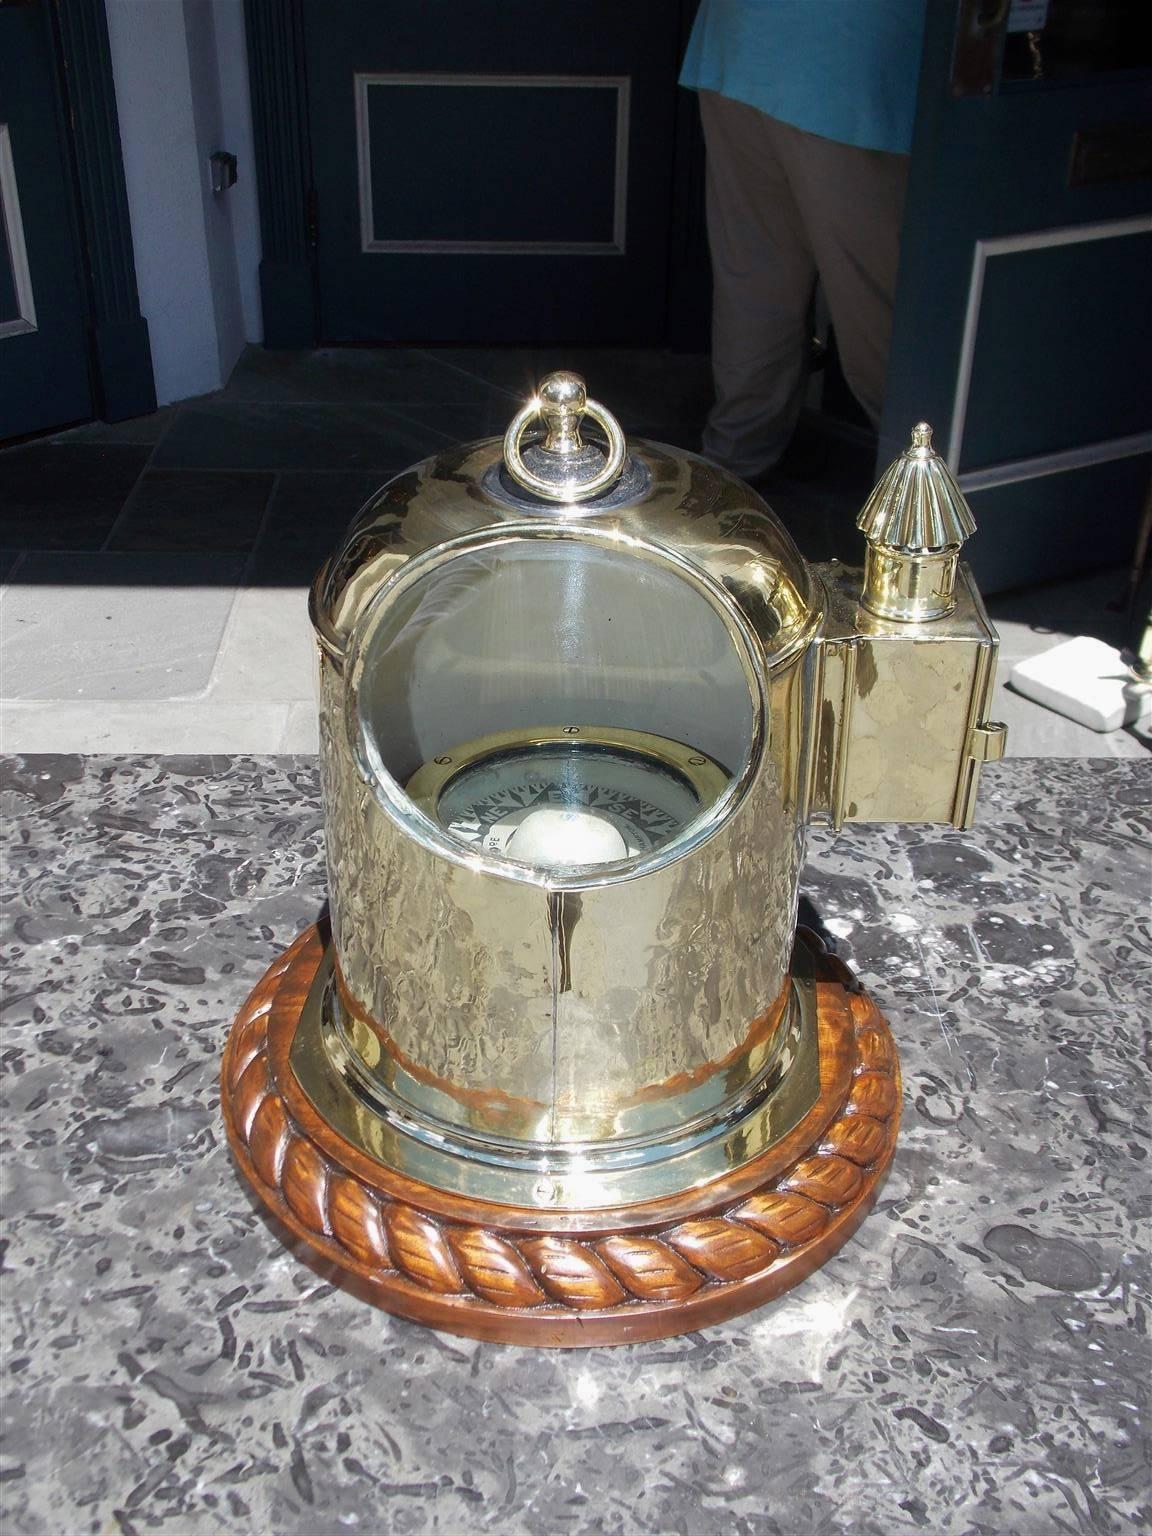 English yacht binnacle mounted on a mahogany rope motif base, oval glass viewing port, with the original removable brass vented side light and carrying handle. Binnacle is fitted with an interior compass submerged in alcohol signed Cope,